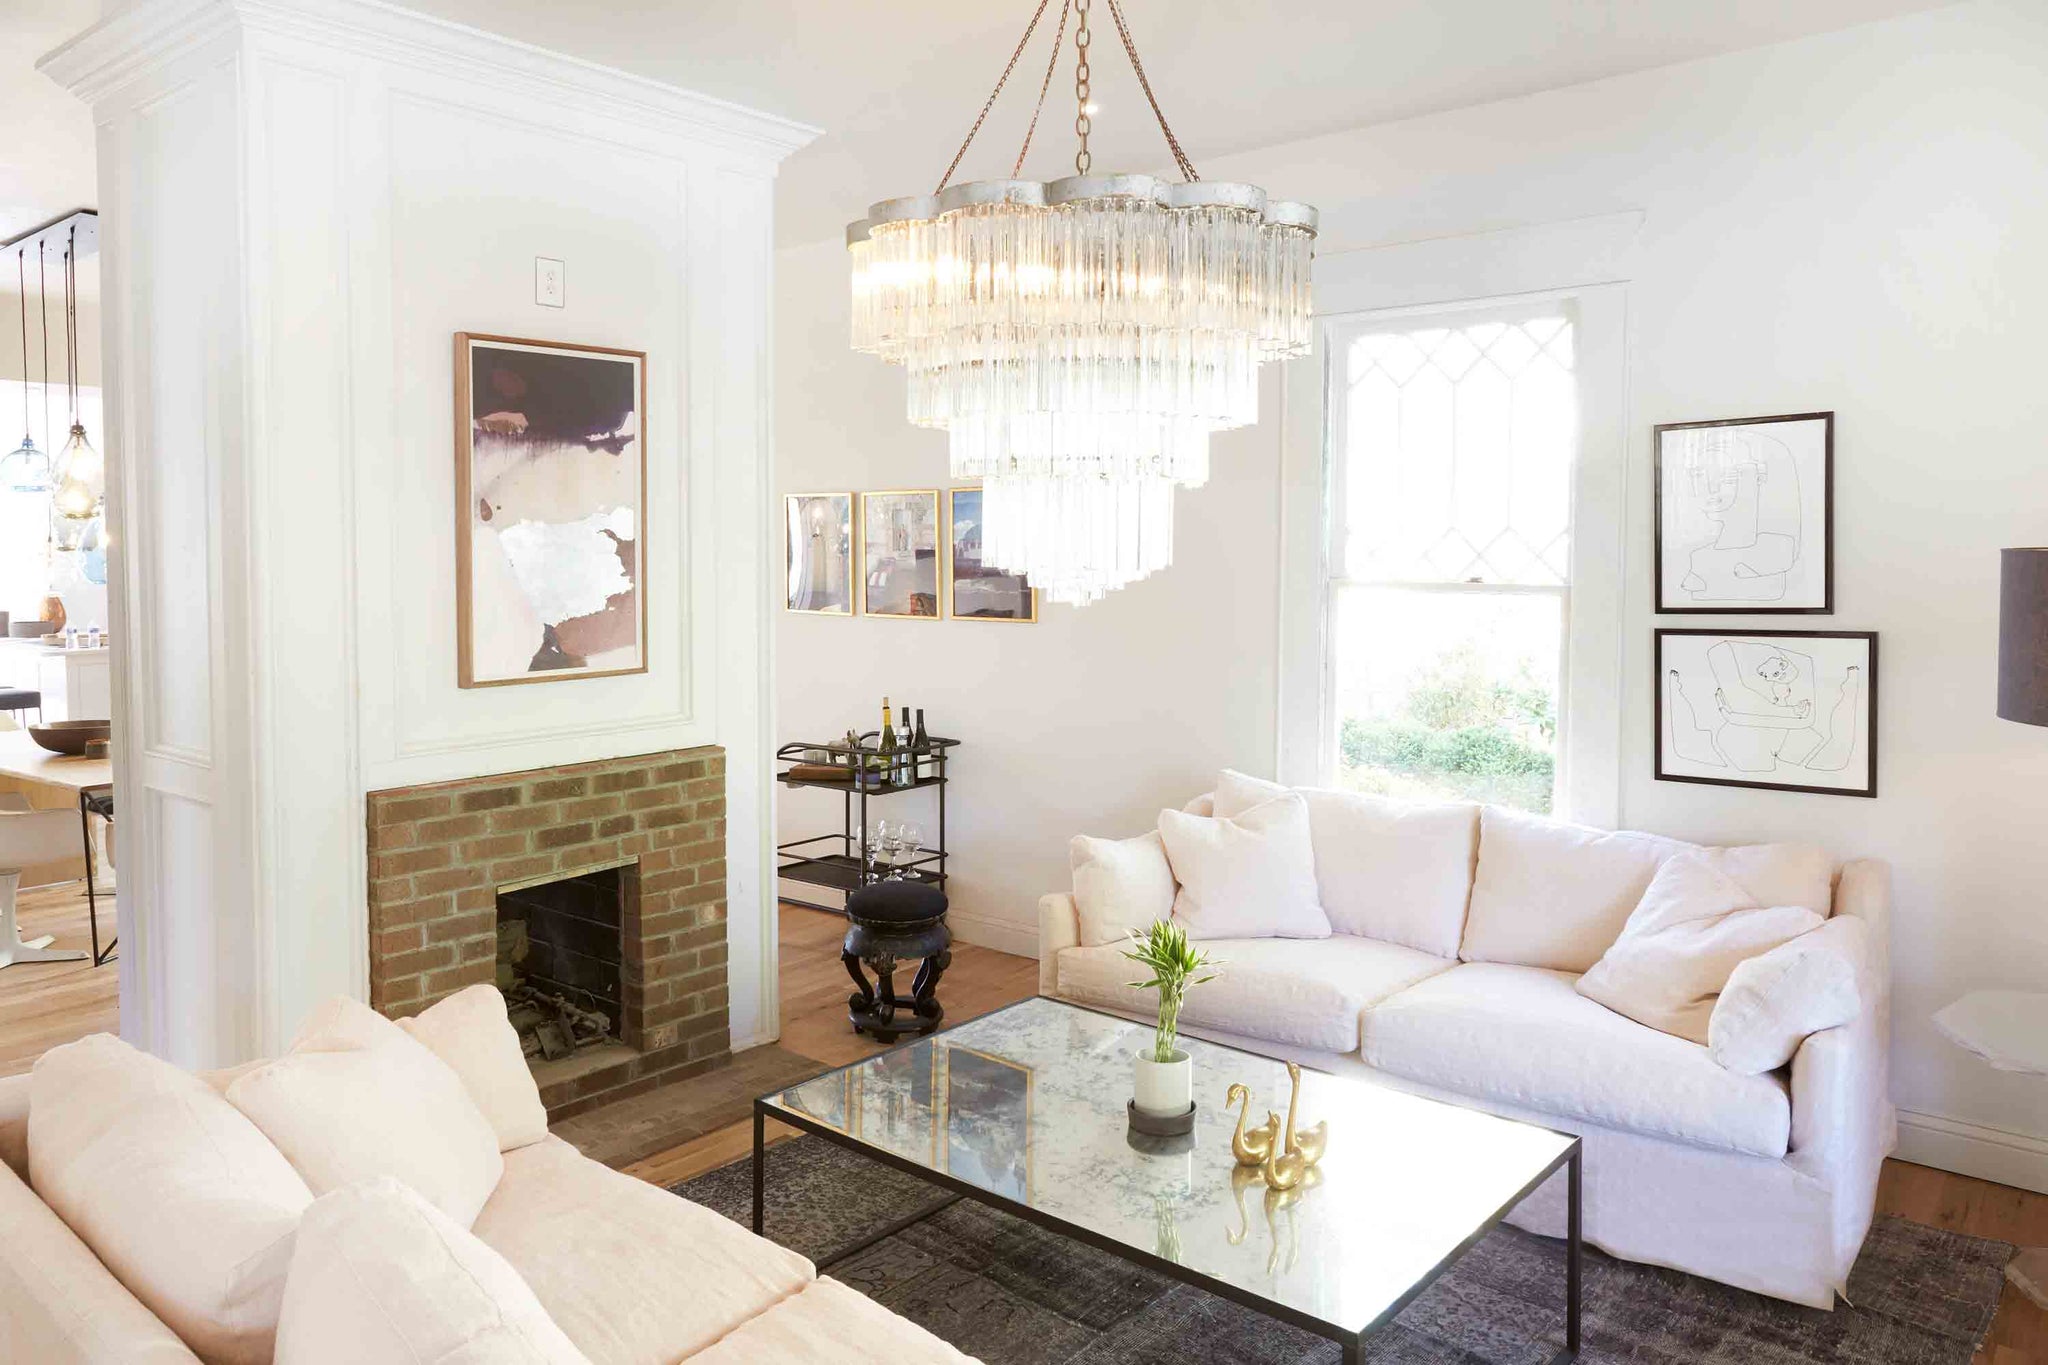  Small living with daylight and two facing Lanister sofas in Brevard Rose linen. A large glass chandelier is hanging above a mirror coffee table in front of a brick fireplace. Photographed in Brevard Rose. 